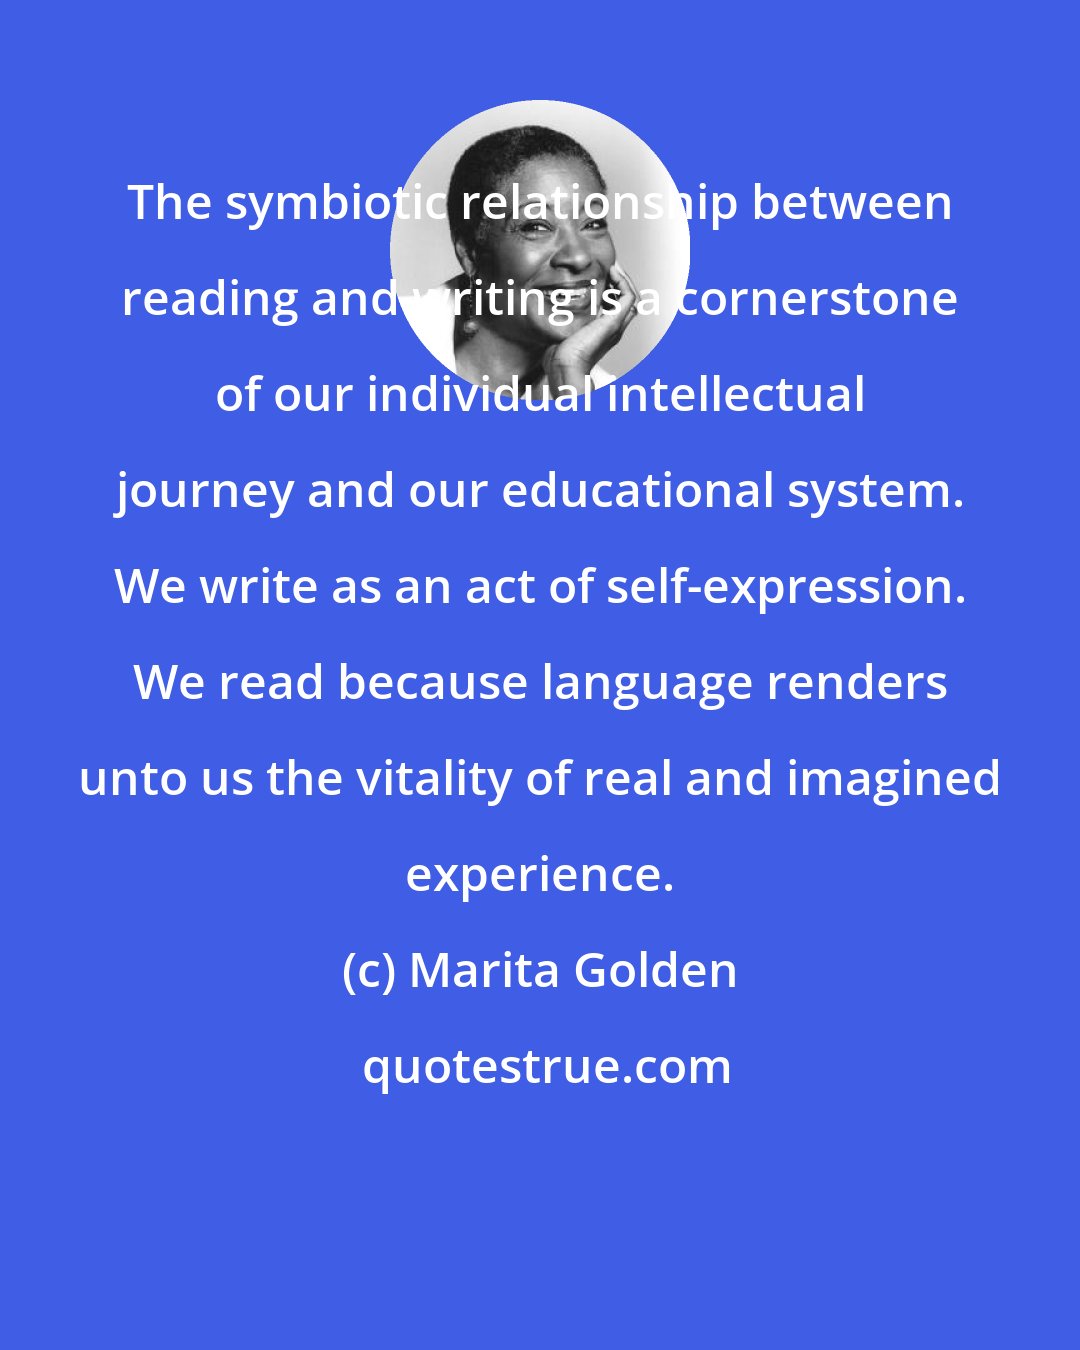 Marita Golden: The symbiotic relationship between reading and writing is a cornerstone of our individual intellectual journey and our educational system. We write as an act of self-expression. We read because language renders unto us the vitality of real and imagined experience.